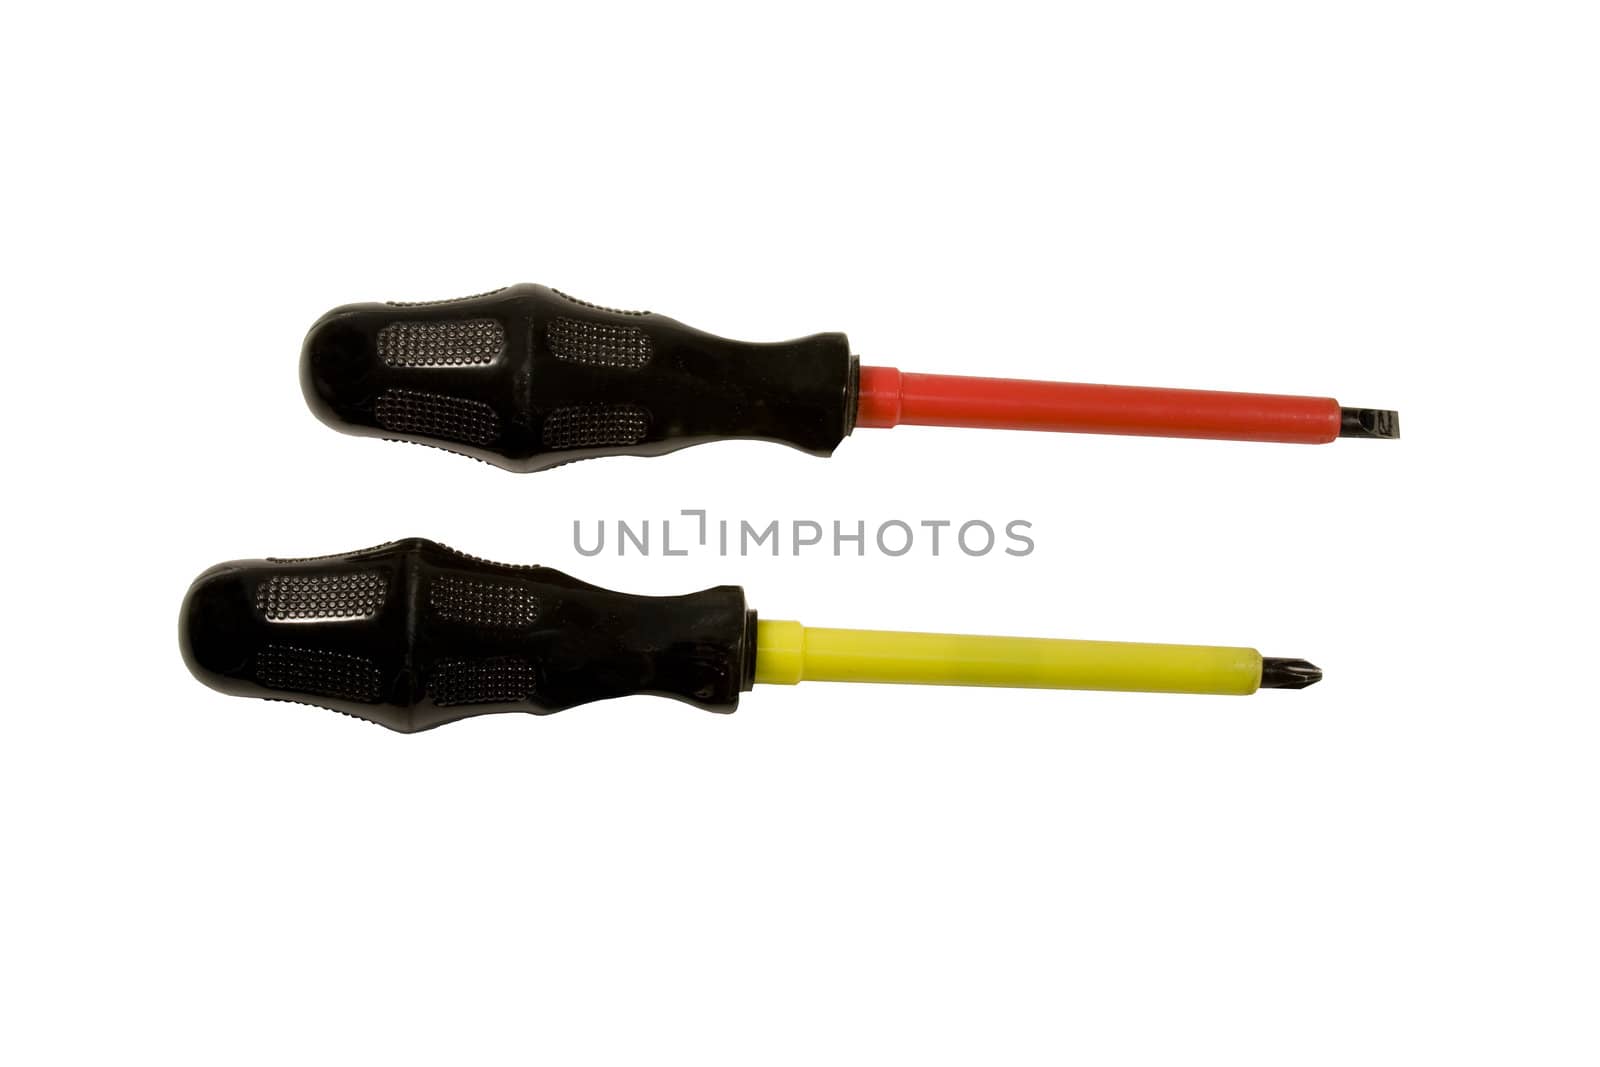 Insulated Electrical screwdrivers by dcwcreations